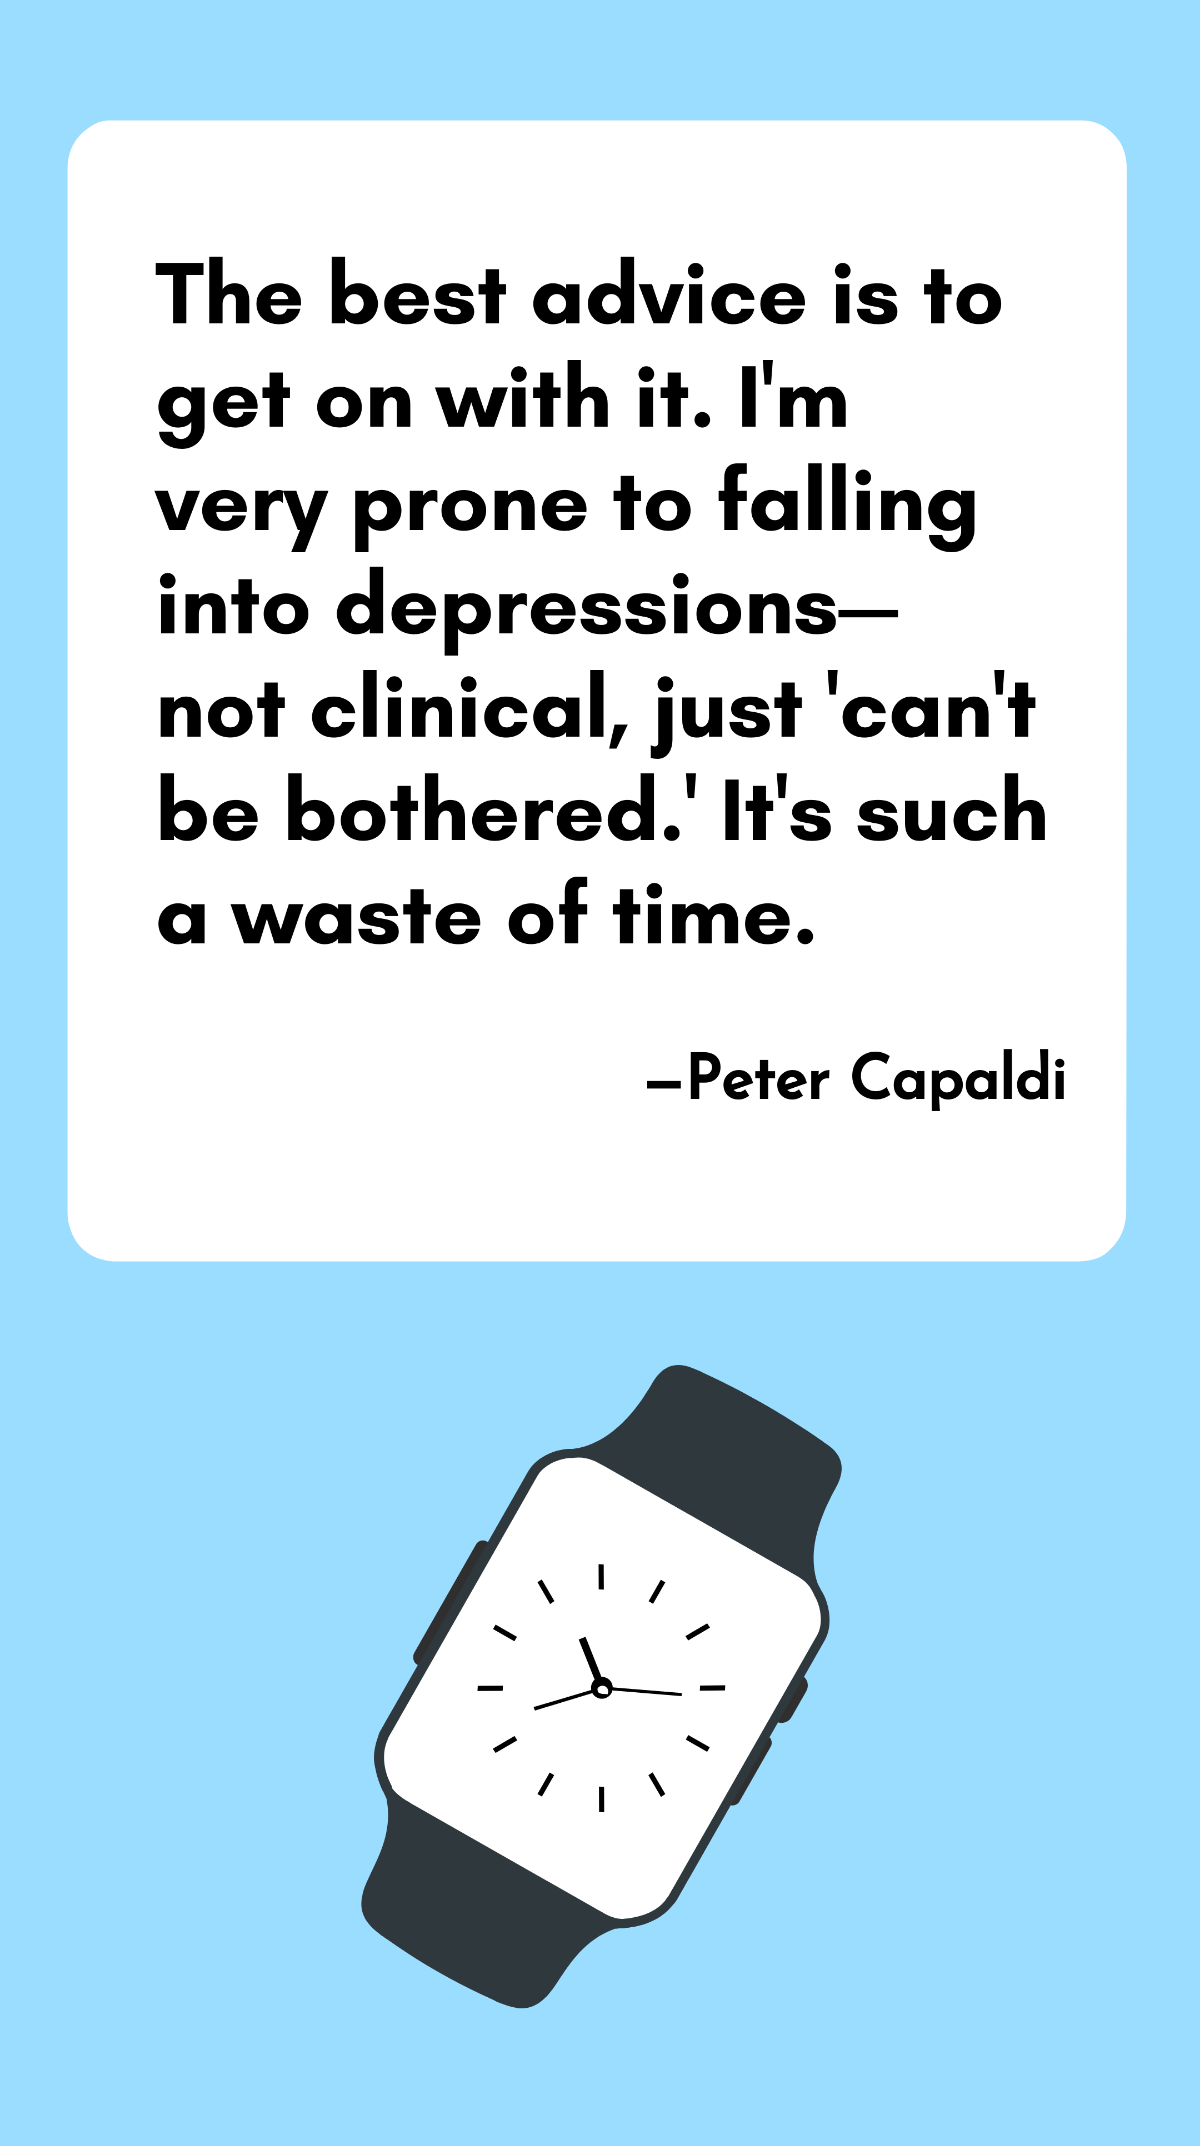 Peter Capaldi - The best advice is to get on with it. I'm very prone to falling into depressions - not clinical, just 'can't be bothered.' It's such a waste of time. Template